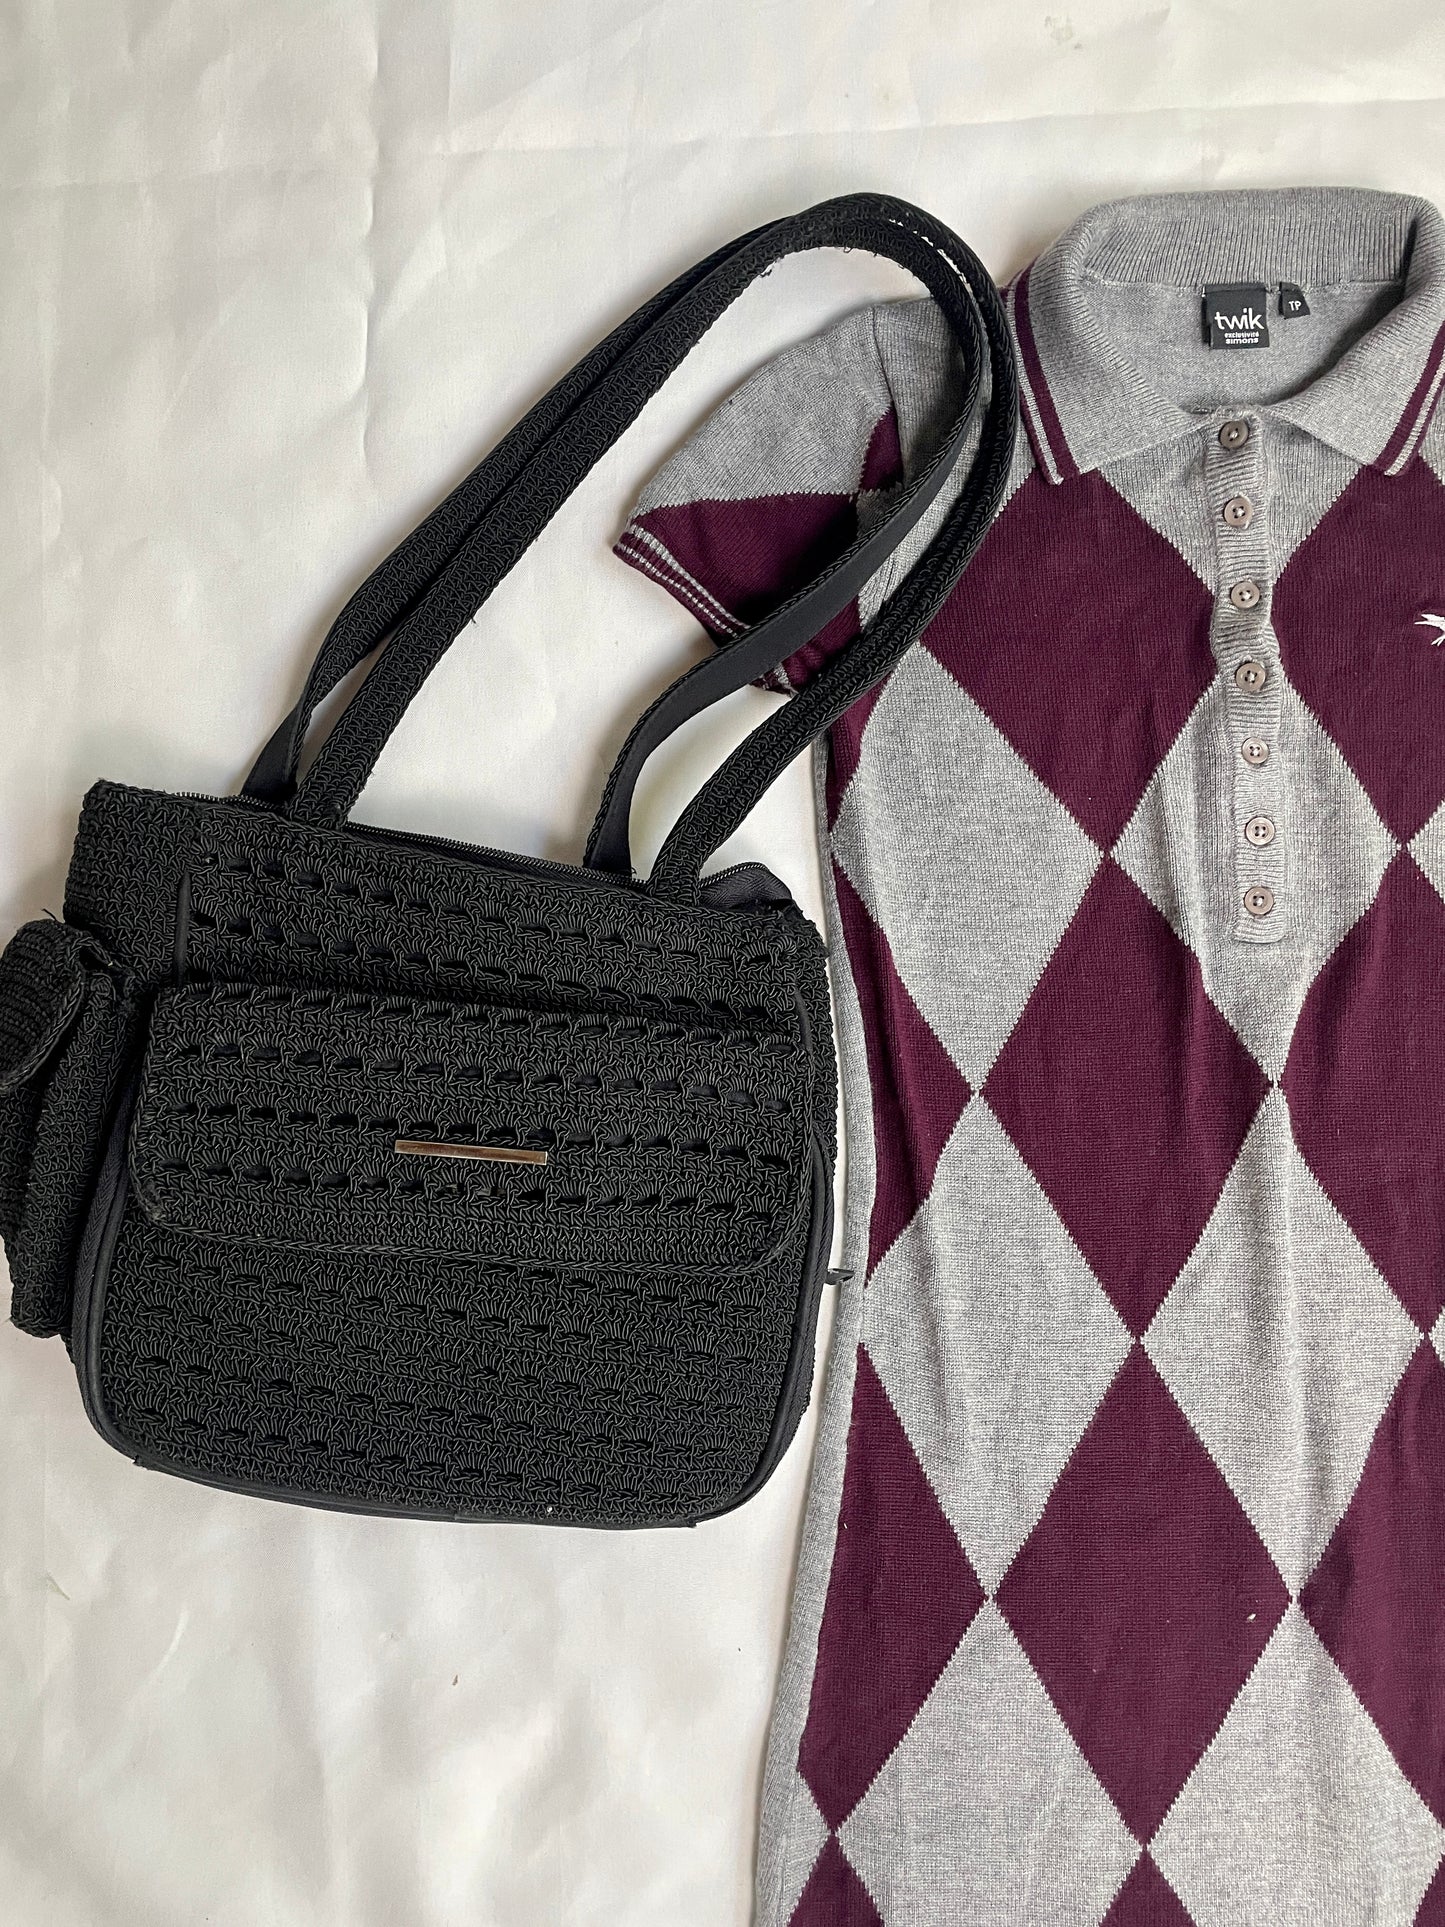 FALL inspired outfit bundle - argyle dress + bag